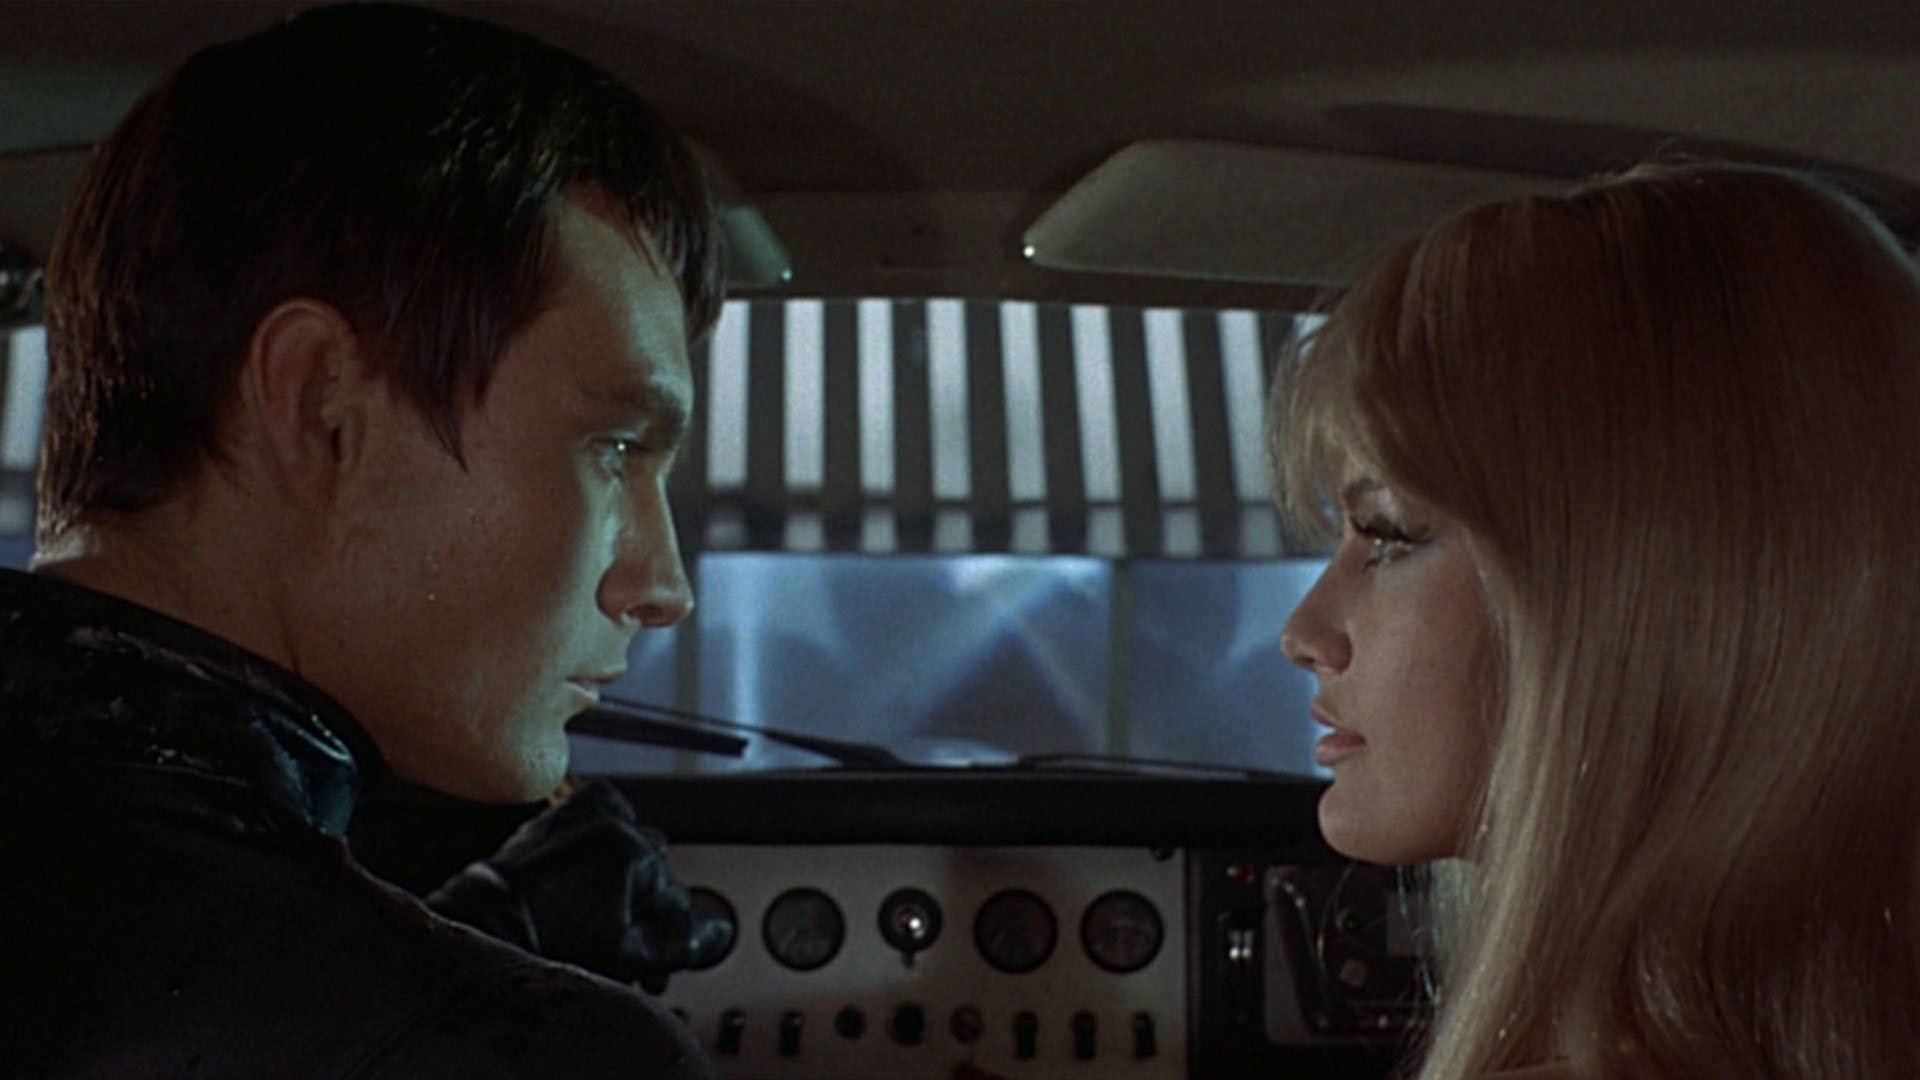 John Philip Love and Marissa Mel look at each other in the car in Danger: Diabolik